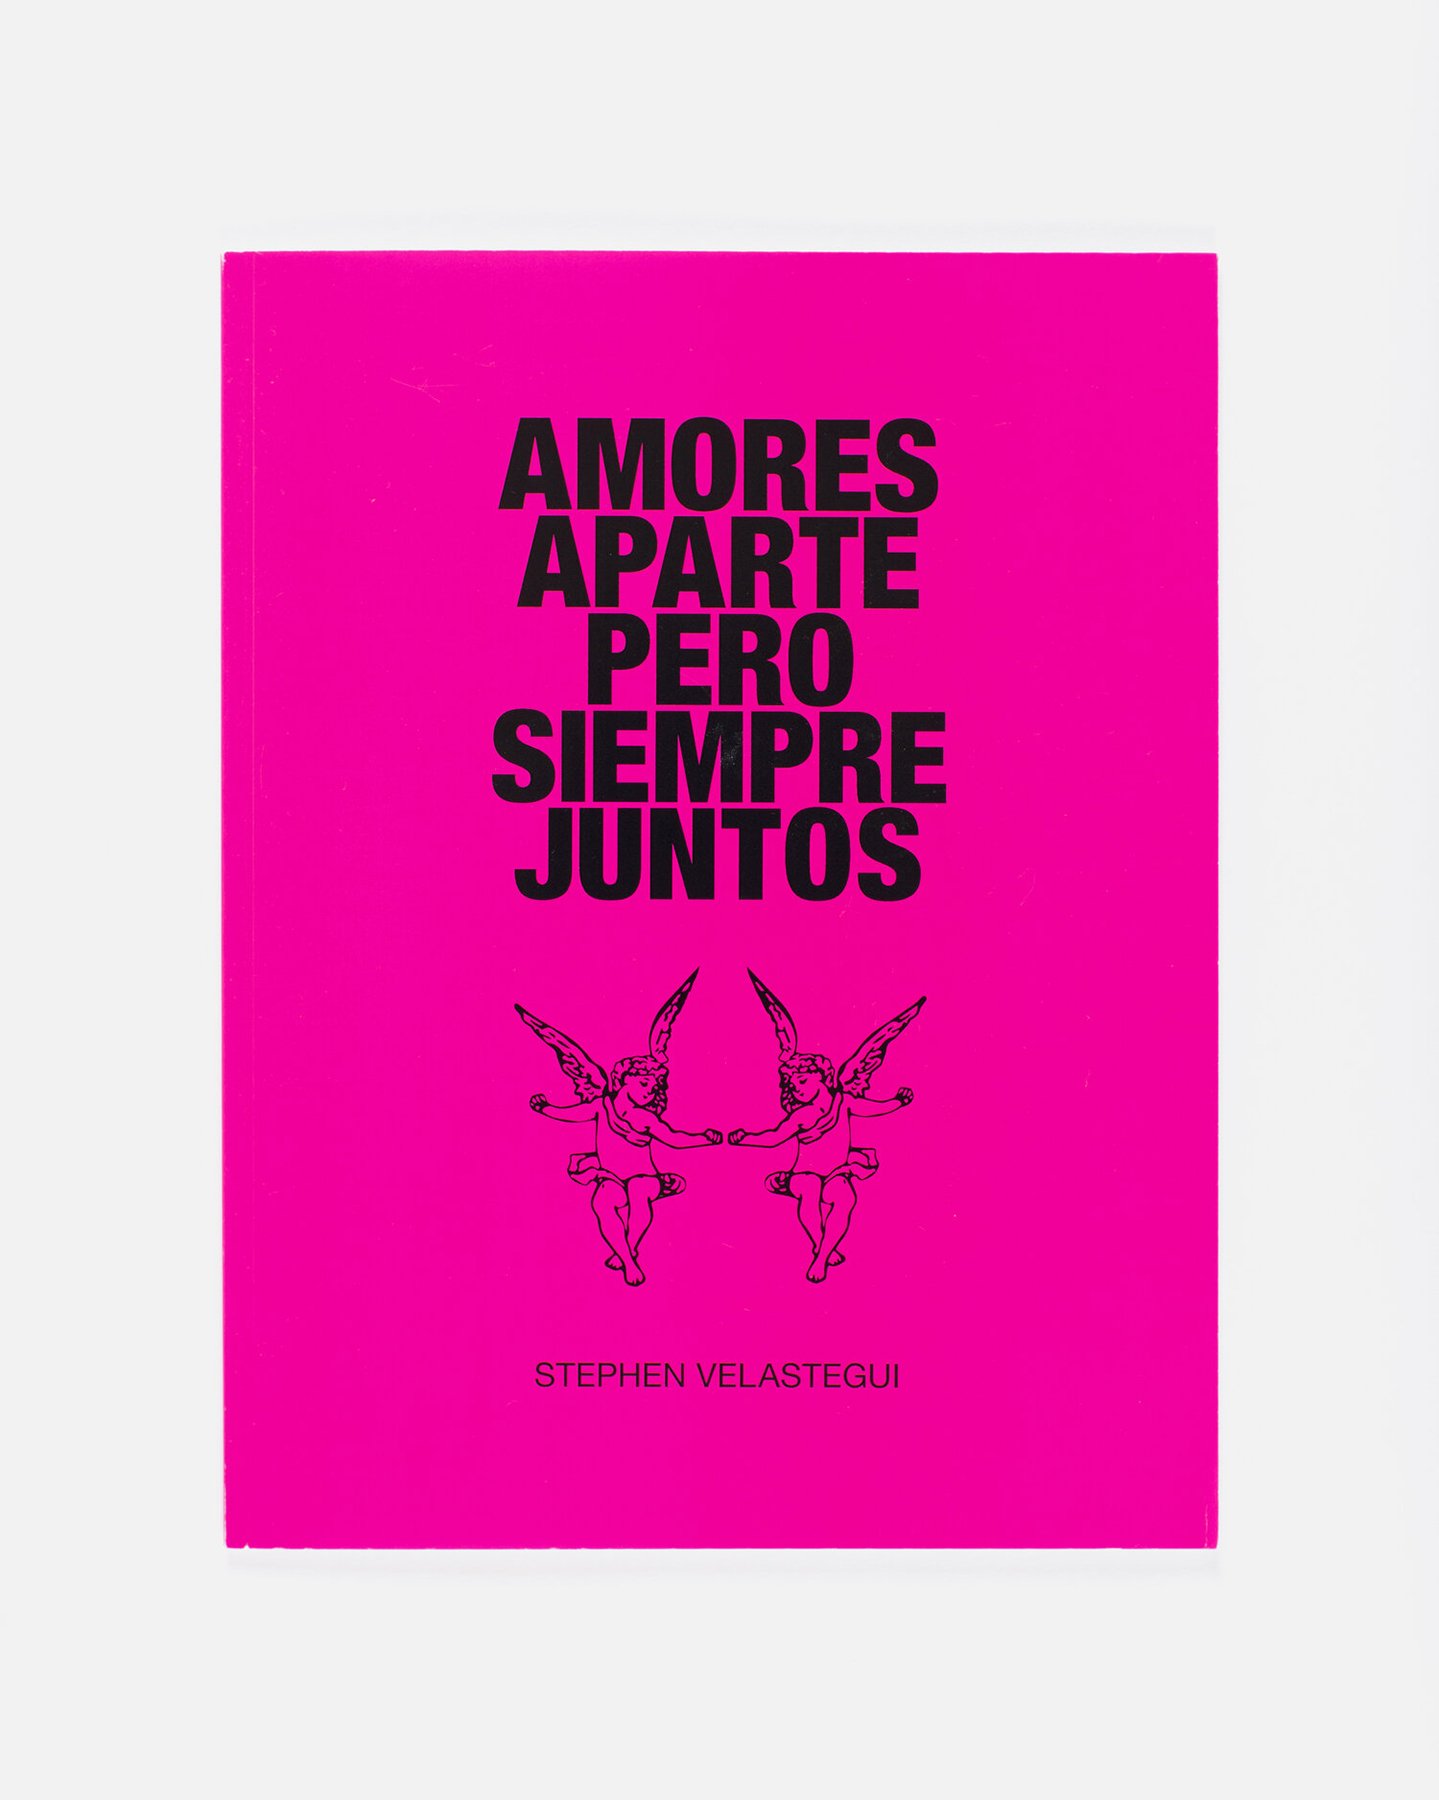   Amores Aparte Pero Siempre Juntos   2nd edition of 100, July 2020  56 pages, perfect bound  Cover design by Eleni Mentis 